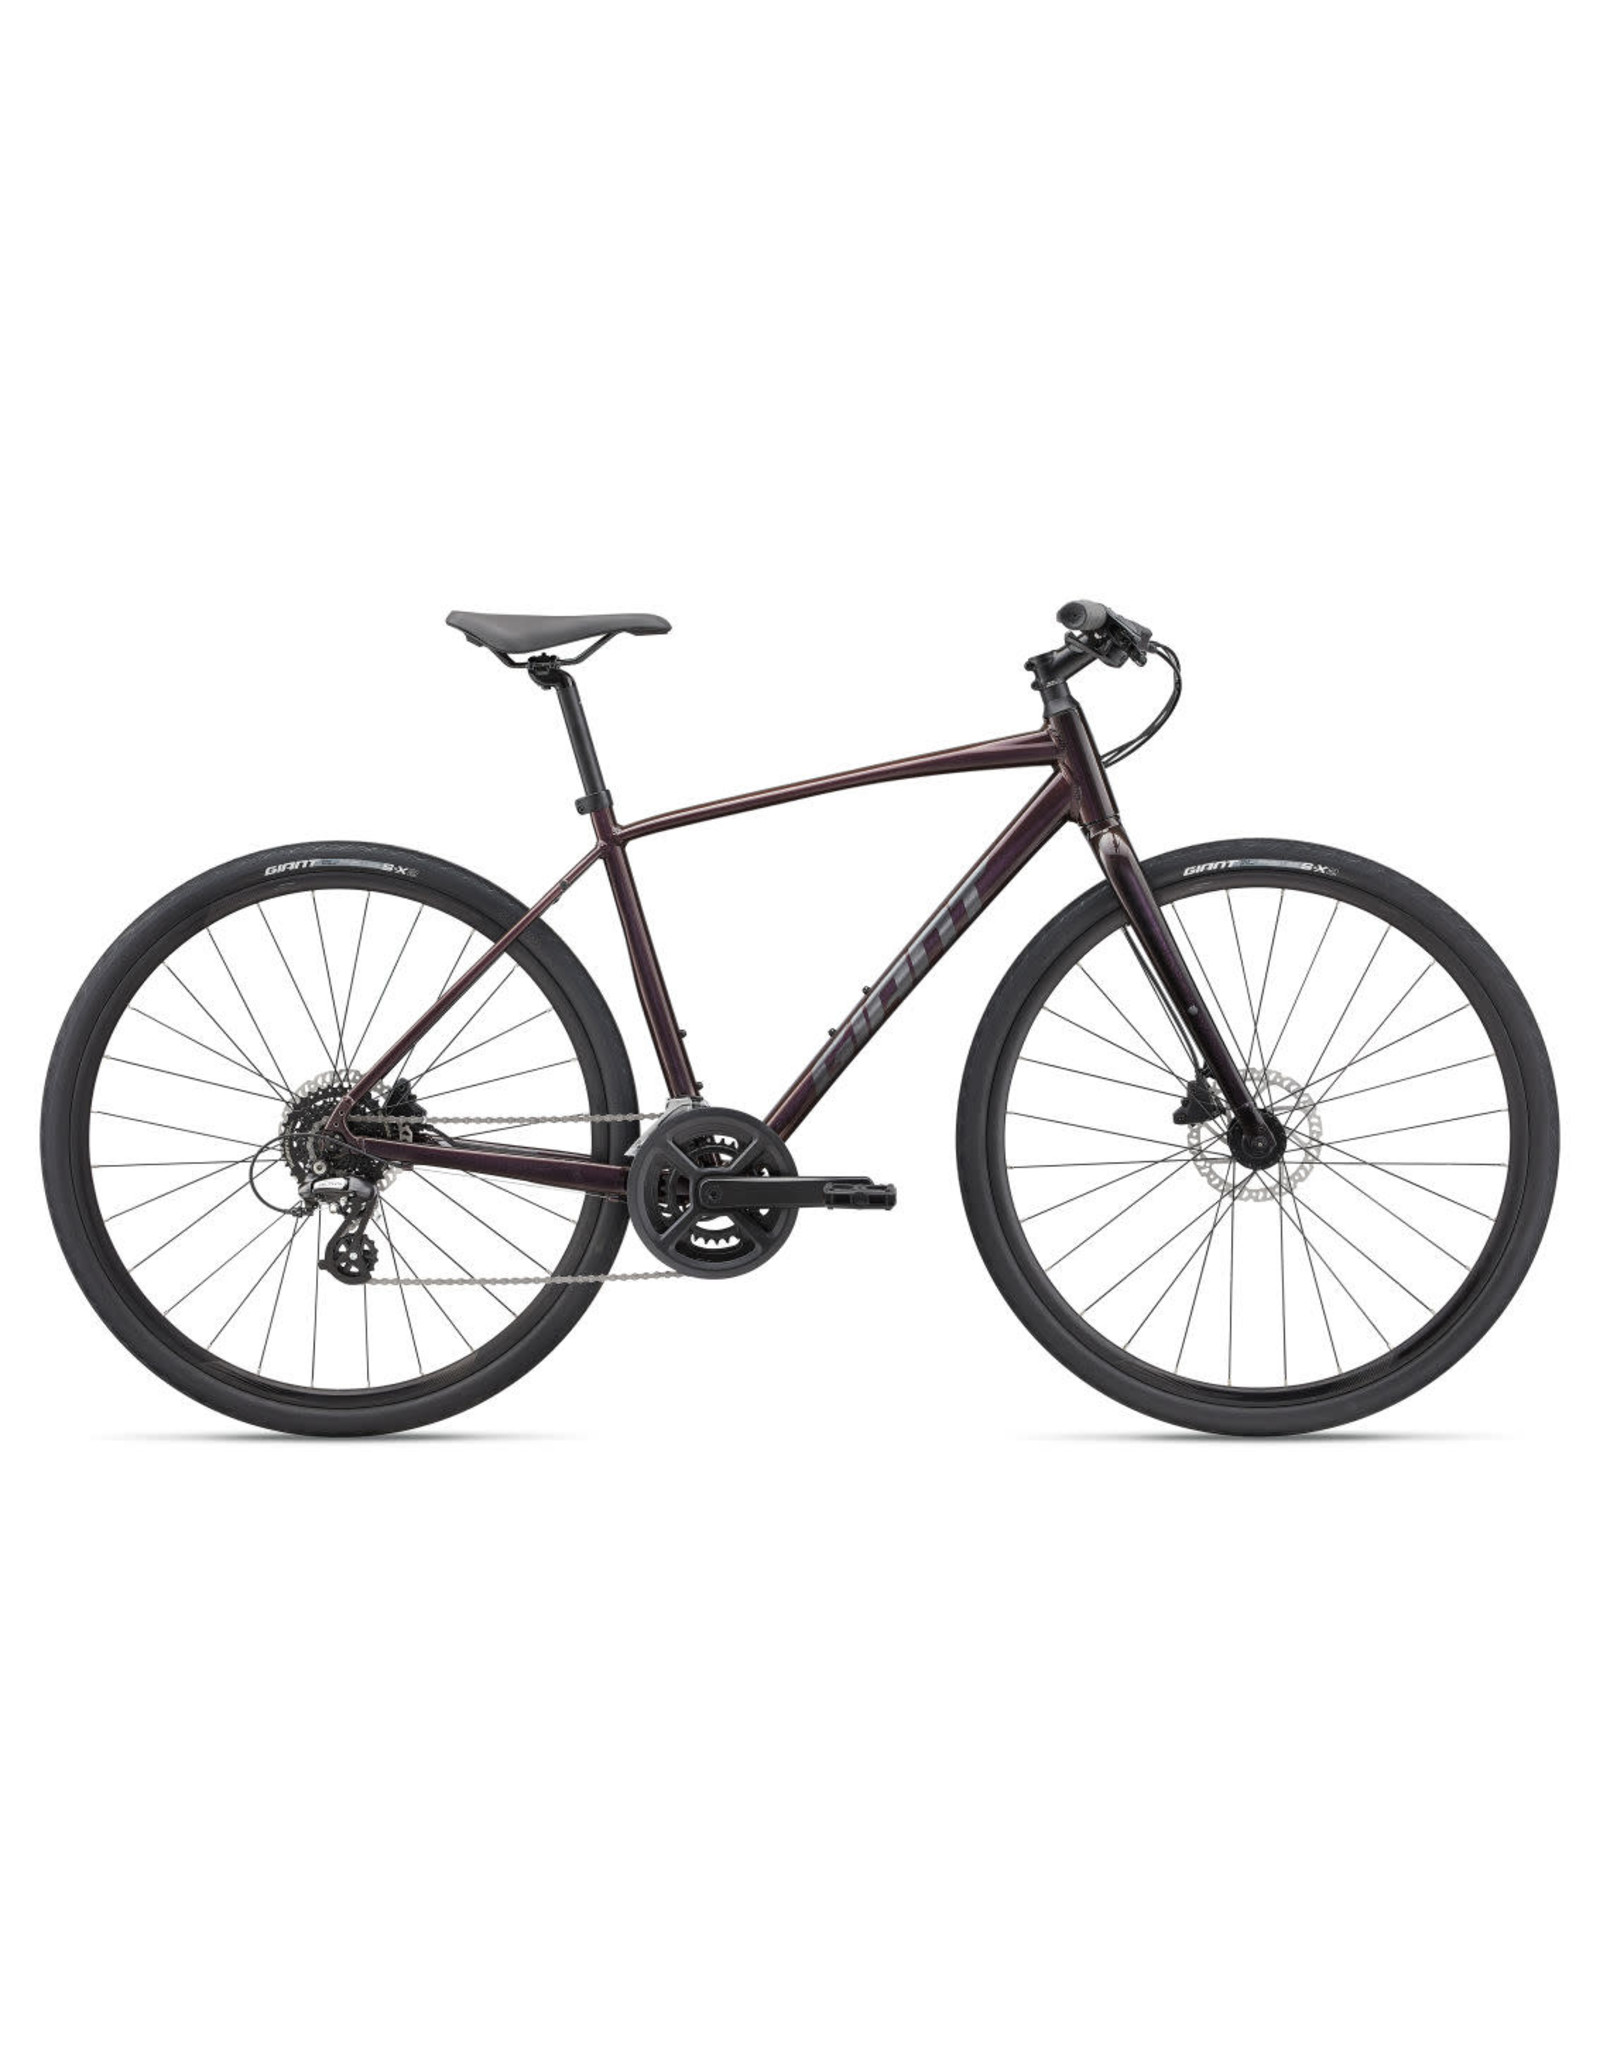 Giant Giant Escape 2 Disc size Large -  Rosewood